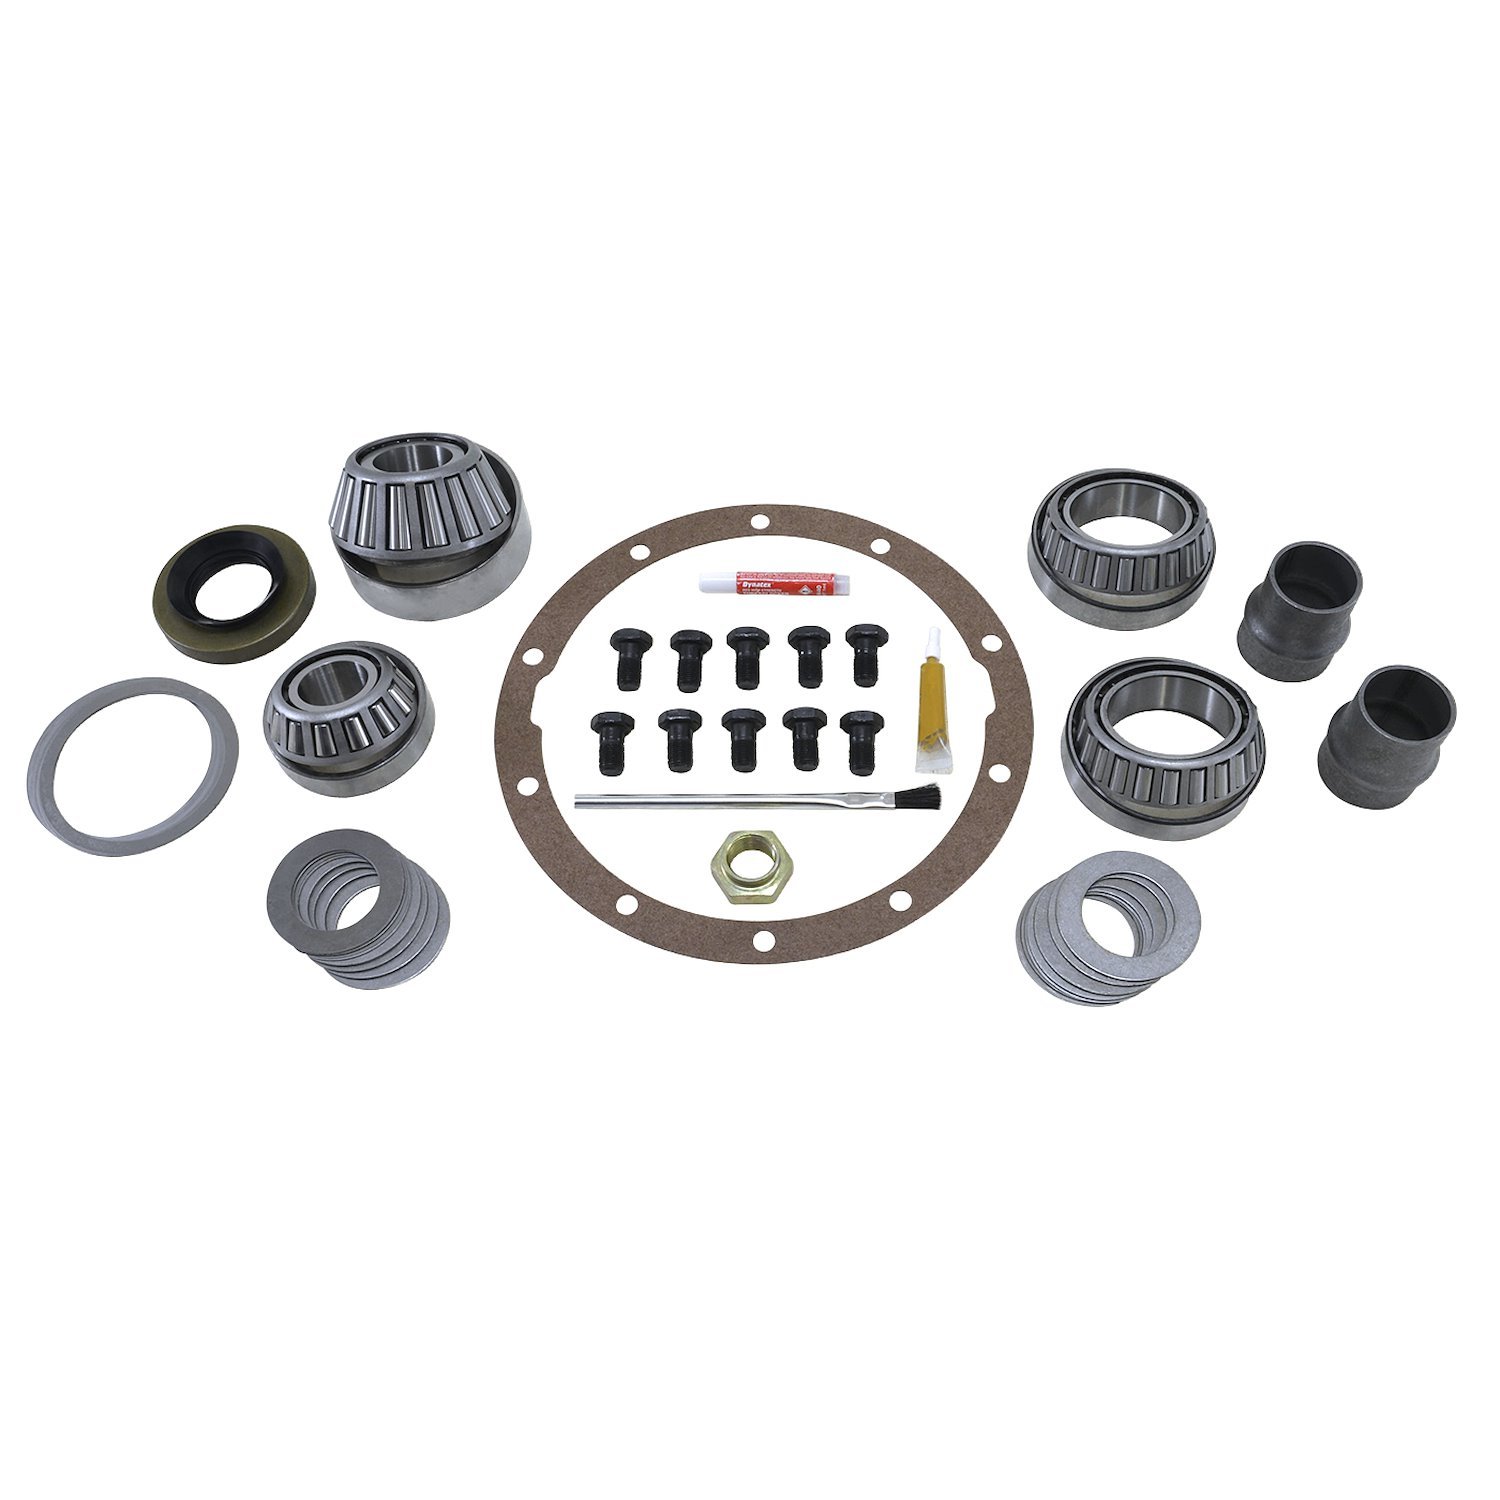 Master Overhaul Kit Pre-2003 Toyota V6 and Turbo 4 Rear Differential